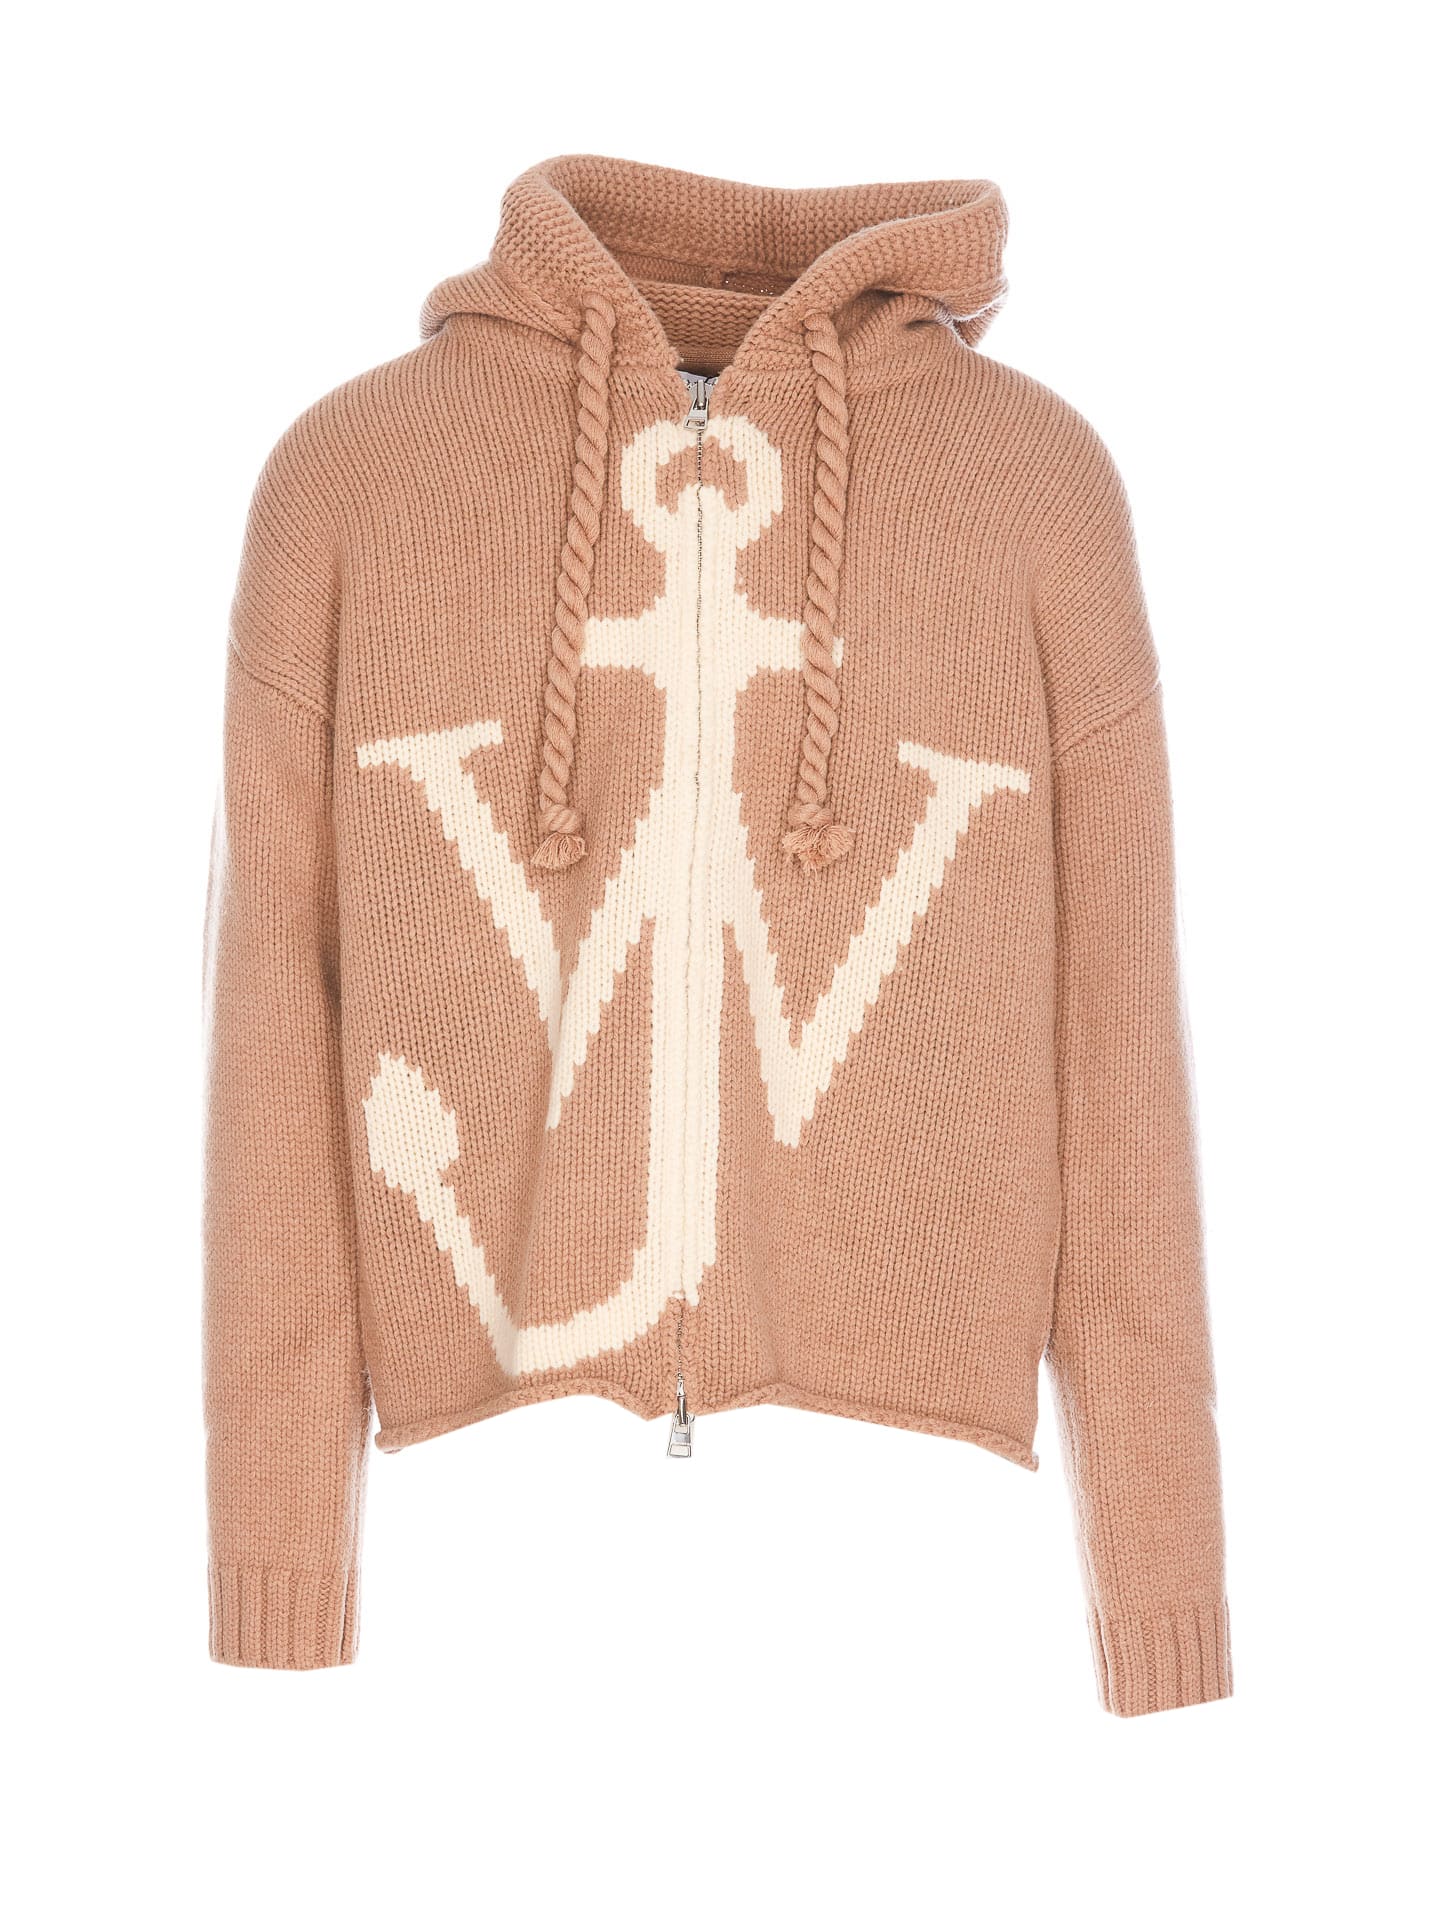 JW ANDERSON ZIP ANCHOR SWEATER